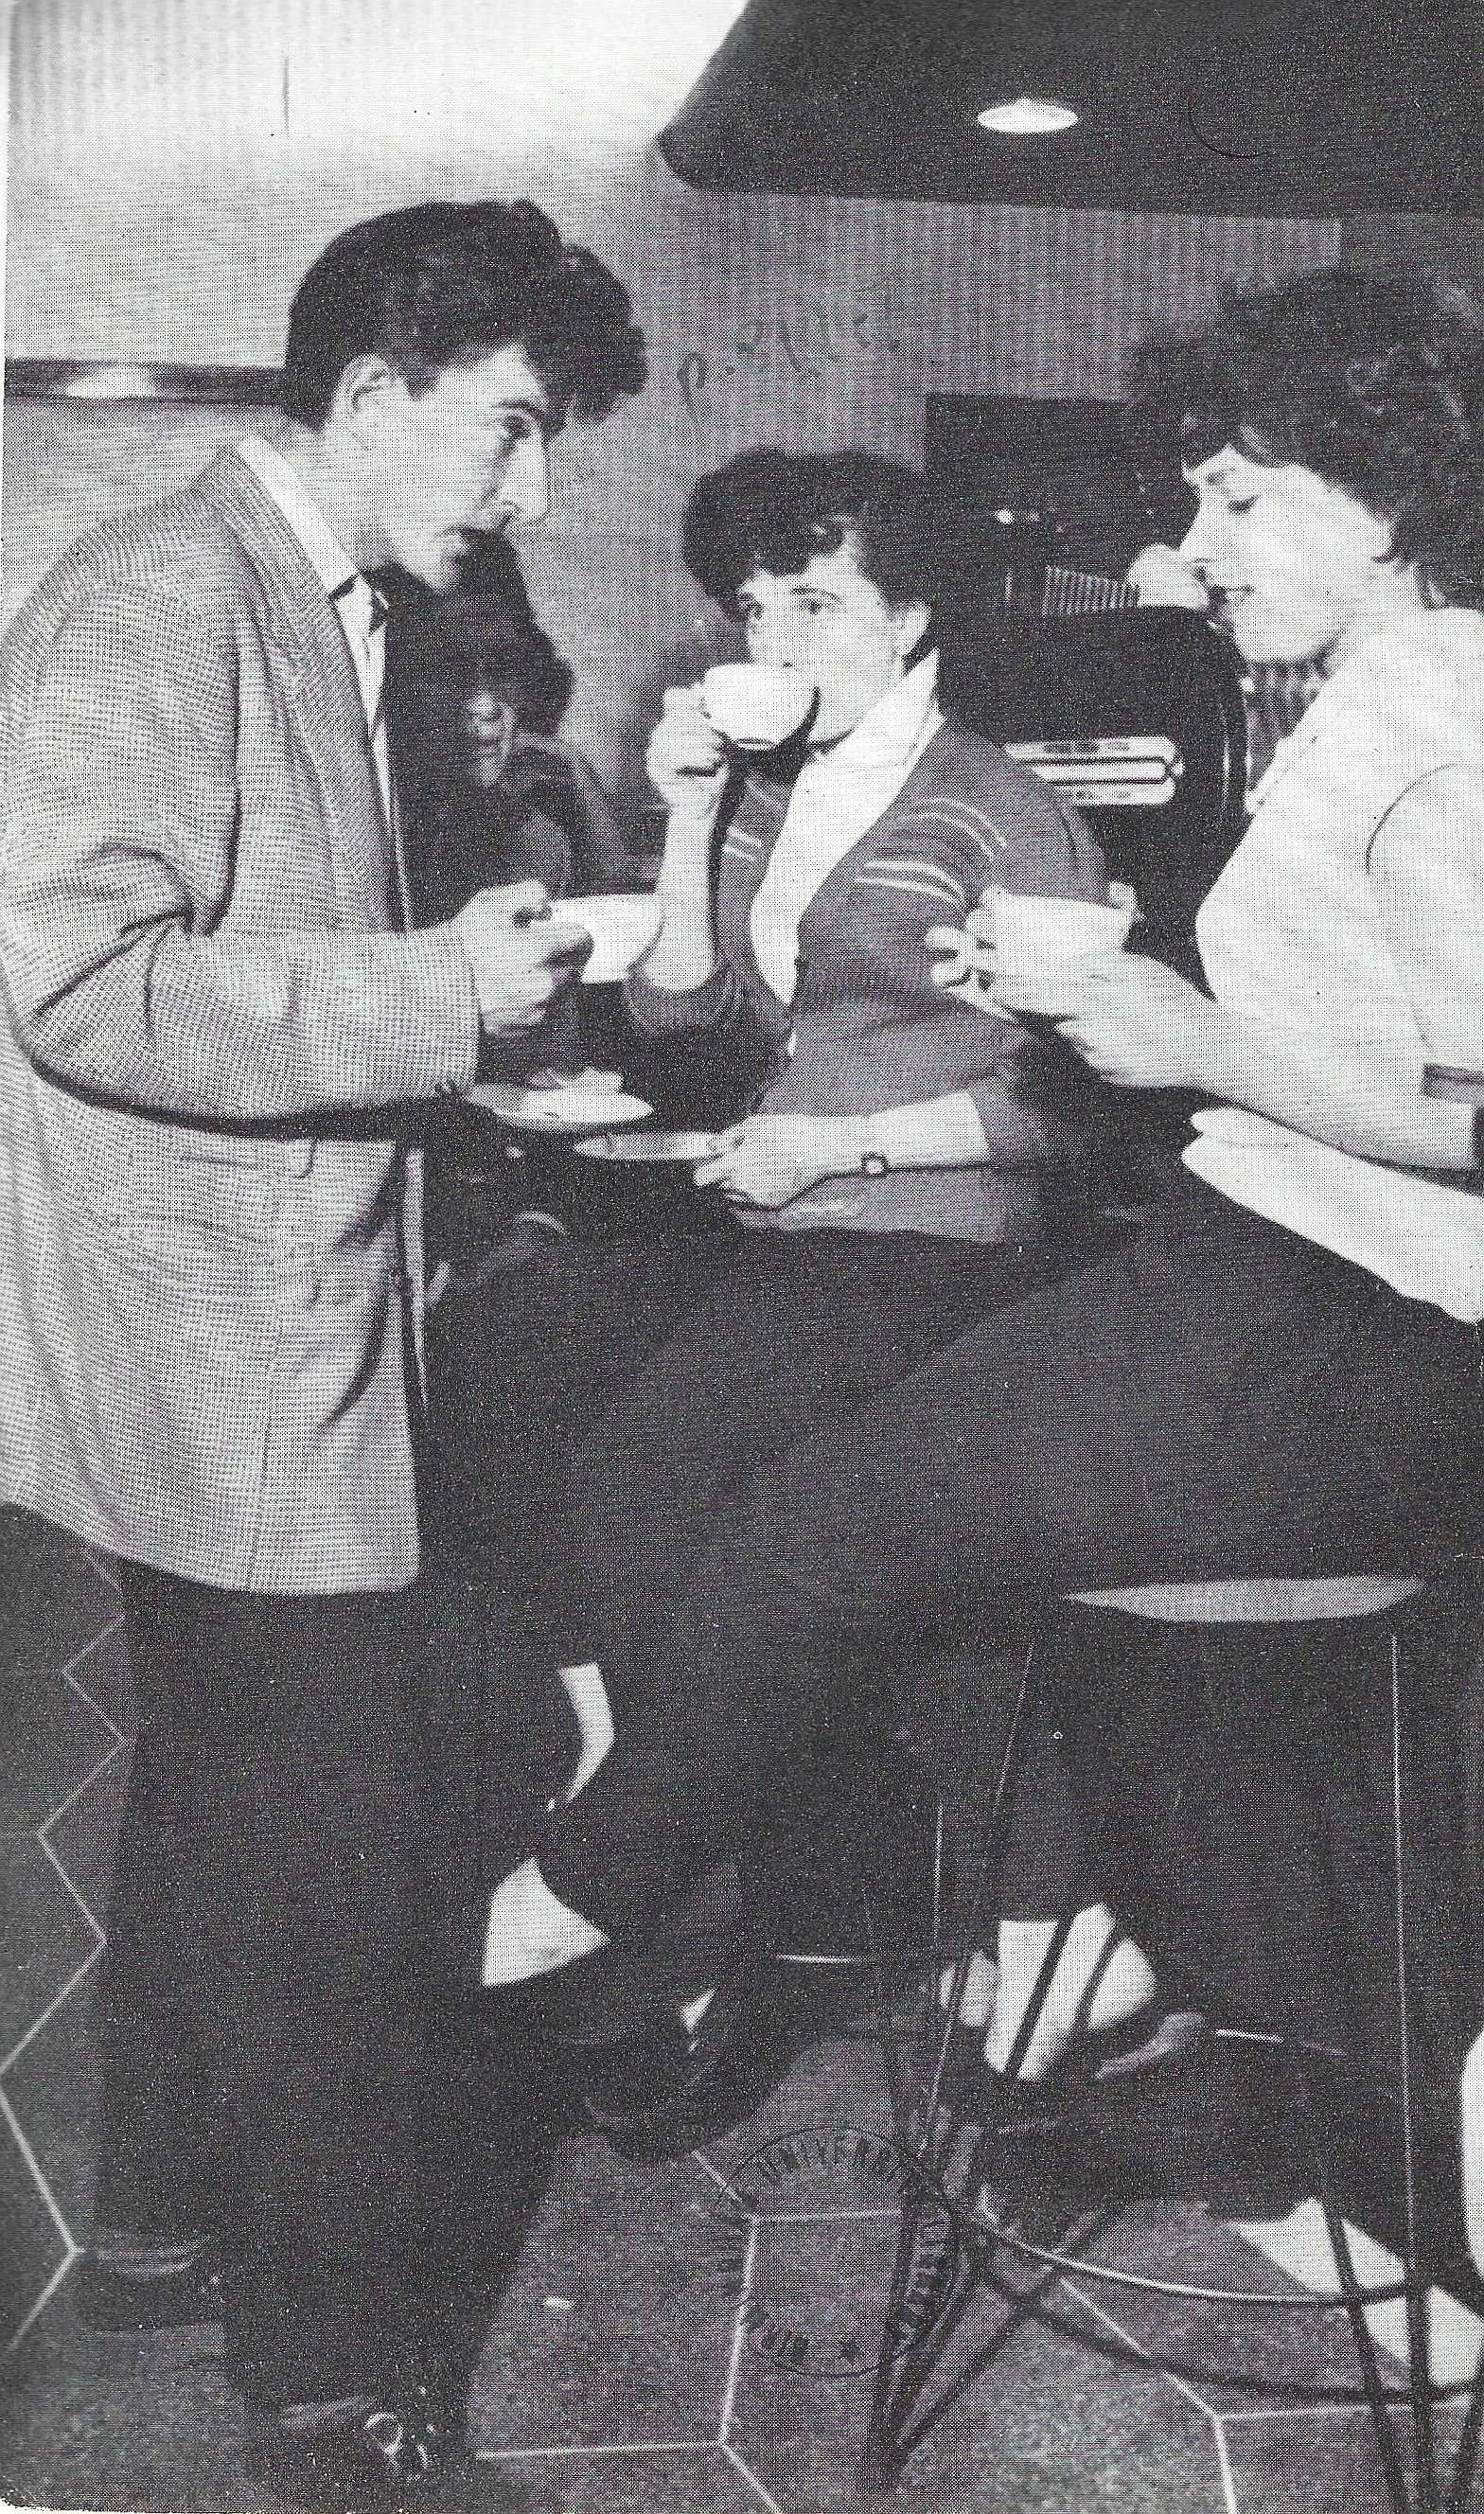 Black and white photograph depicts three young people in a coffee bar. Two young women with curly hair and wearing jumpers are sat on bar stools, obscuring the view of the bar itself. A young man in a light coloured jacket with styled hair stands facing them. All of them are holding, or sipping from, porcelain cups with saucers.